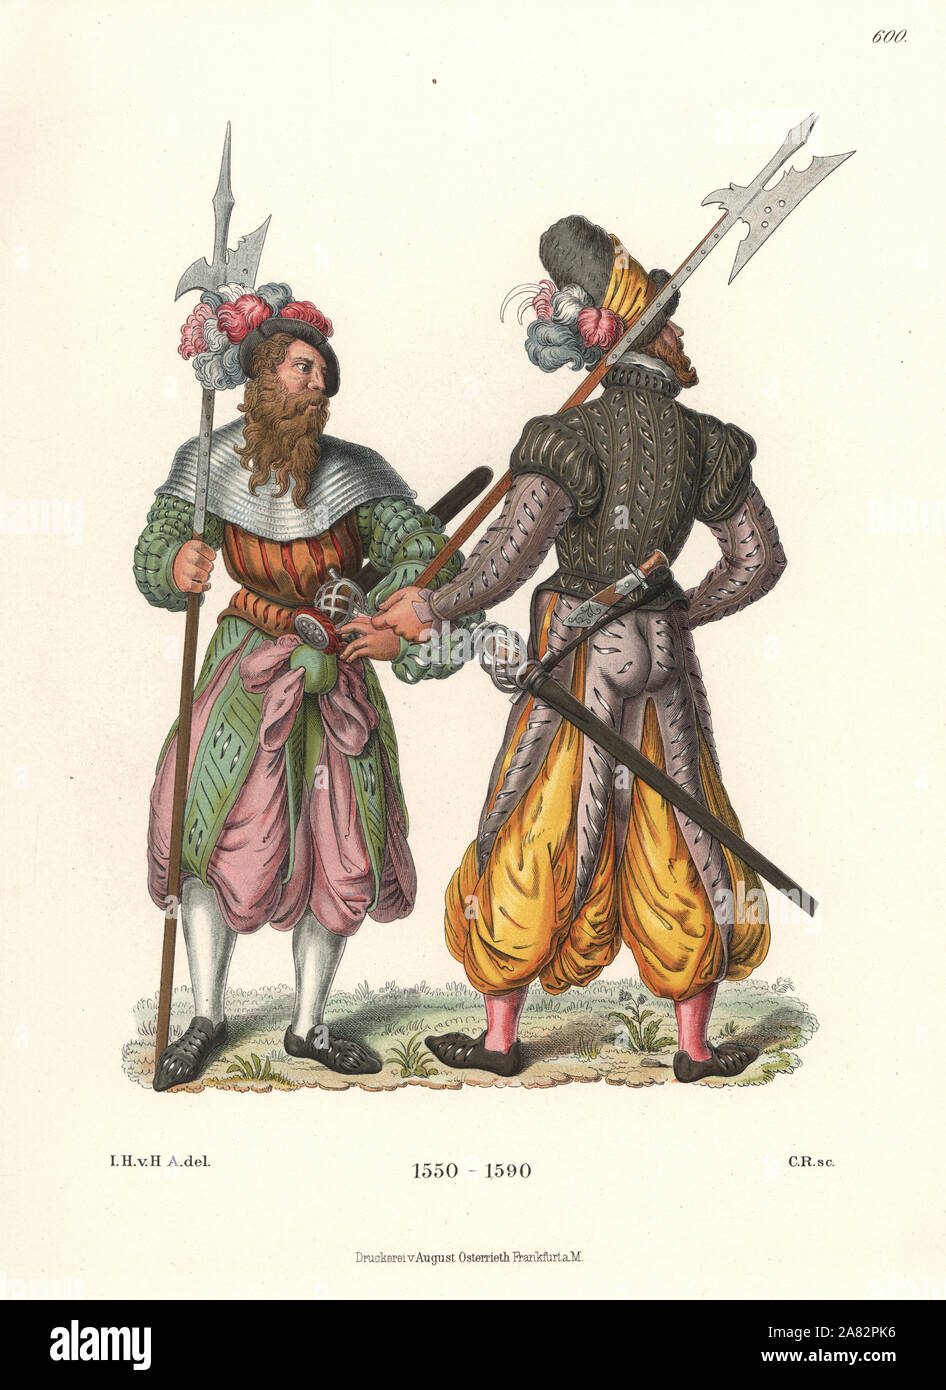 German soldiers with halberds wearing harem pants, late 16th century. Gunpowder expert with his back to us, and soldier with cap and armour collar. From color pen drawings in the possession of C. Becker of Wurzburg. Chromolithograph from Hefner-Alteneck's Costumes, Artworks and Appliances from the Middle Ages to the 17th Century, Frankfurt, 1889. Illustration by Dr. Jakob Heinrich von Hefner-Alteneck, lithographed by C. Regnier. Dr. Hefner-Alteneck (1811-1903) was a German museum curator, archaeologist, art historian, illustrator and etcher. Stock Photo